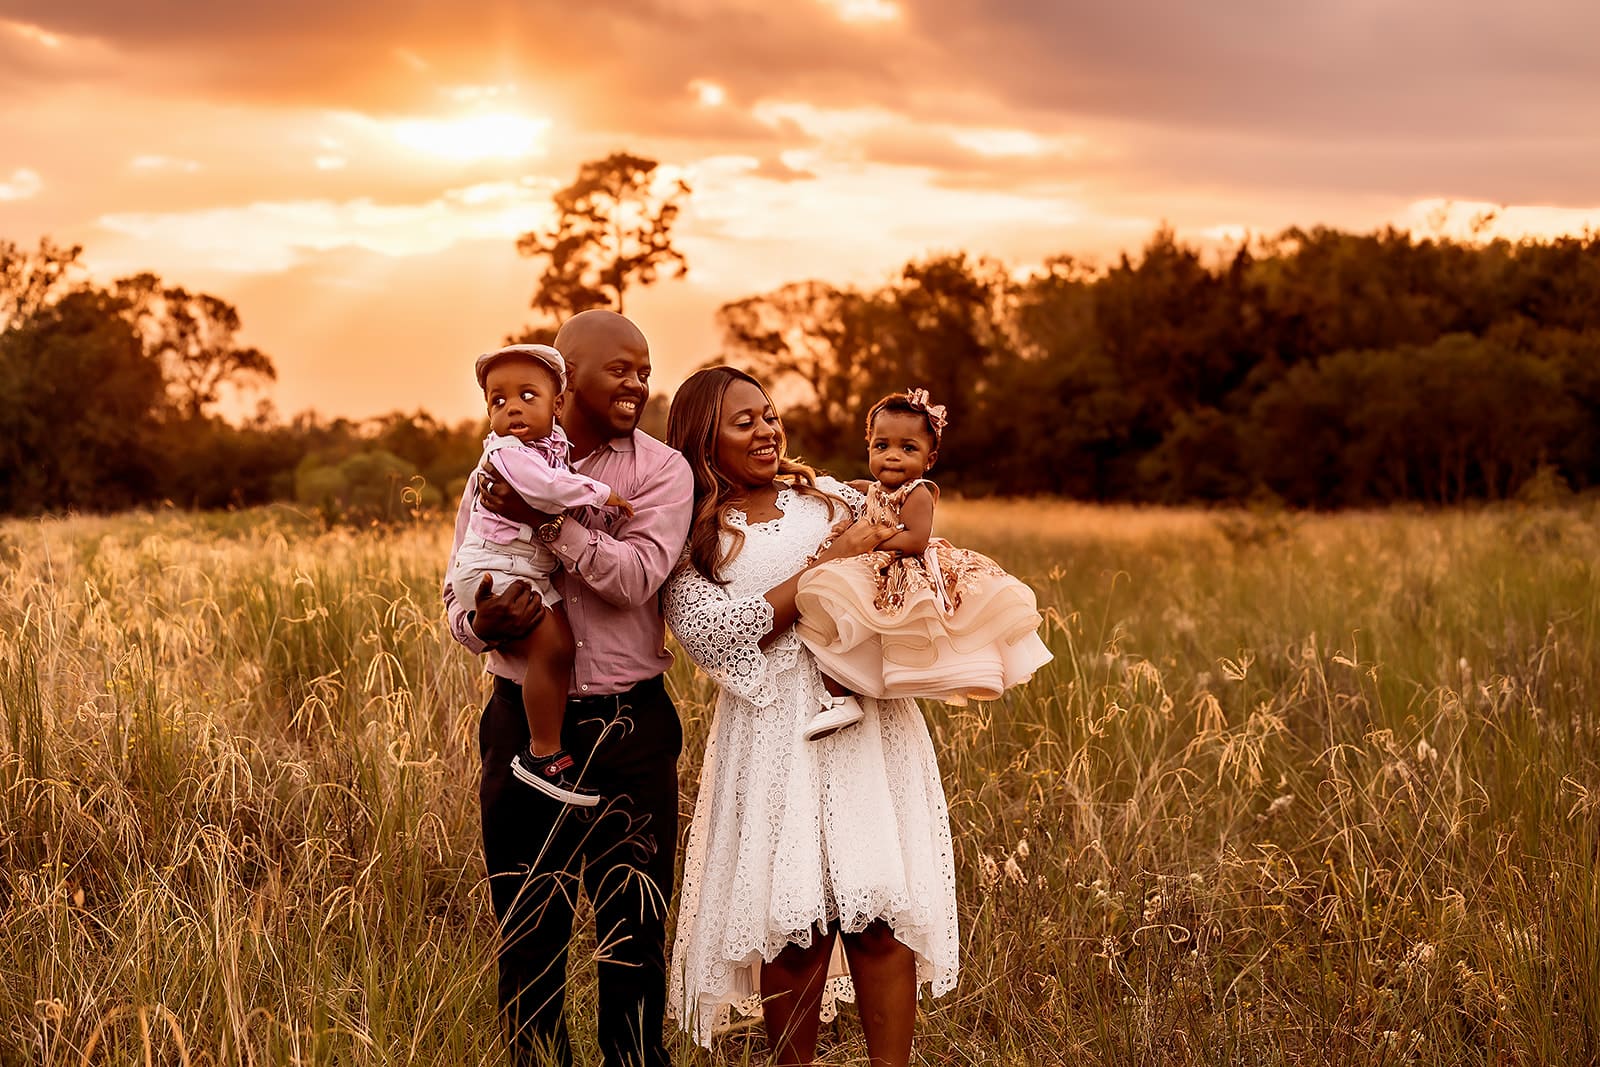 Pin by Ann Edwards on Black love | Family portrait poses, Family photoshoot  outfits, Family photoshoot poses